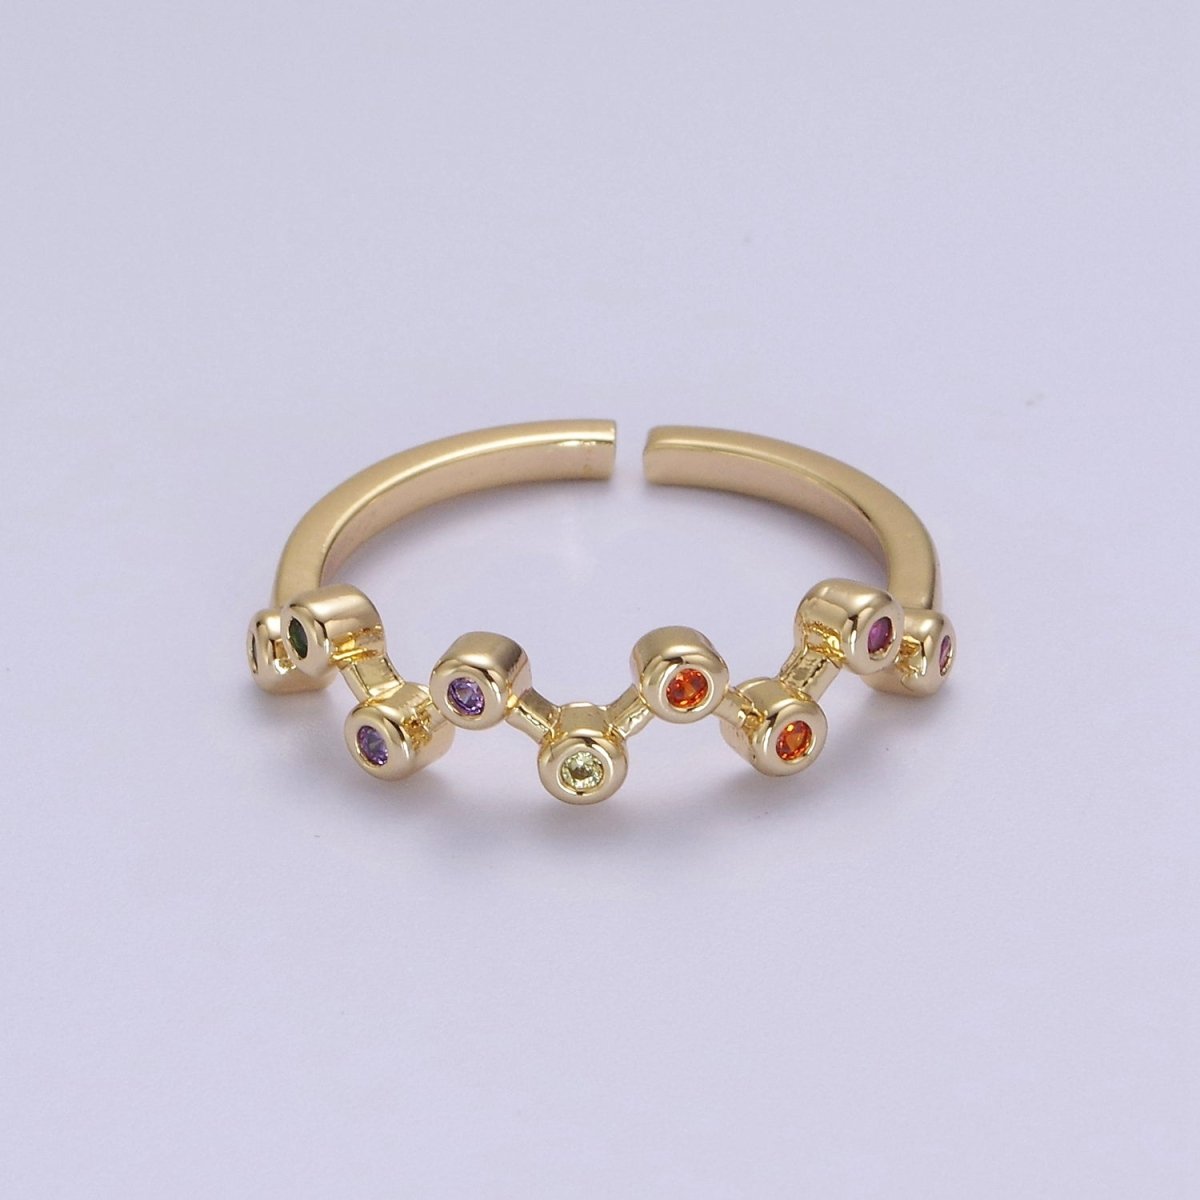 18K Gold Filled Dainty Ring Thin Cz Multicolored Rings - Colorful Stacking Ring - Minimalist Jewelry S-520 - DLUXCA